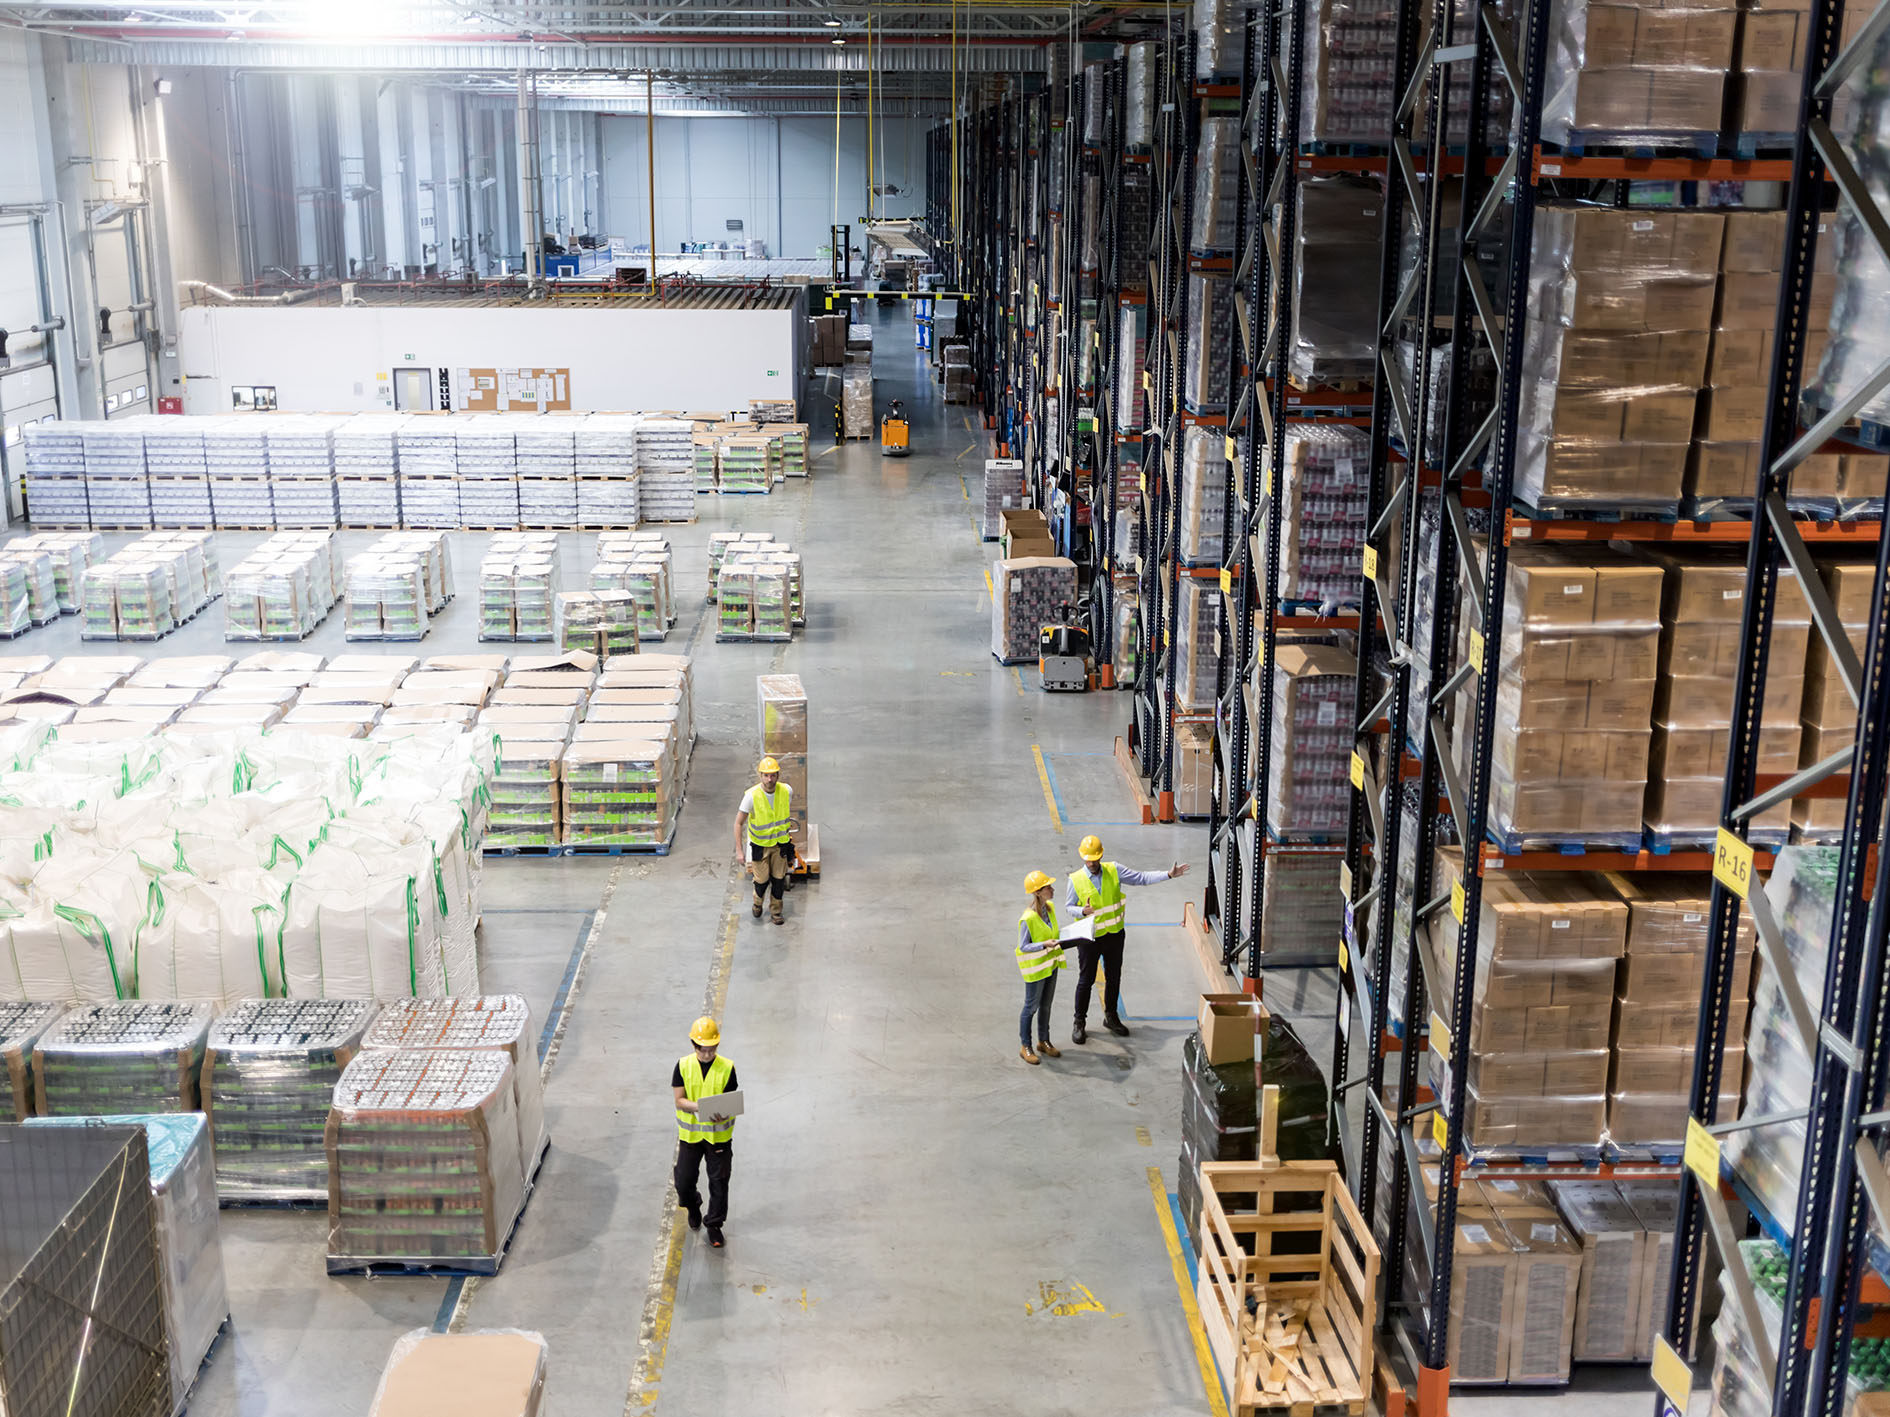 Set your sights on warehouse safety